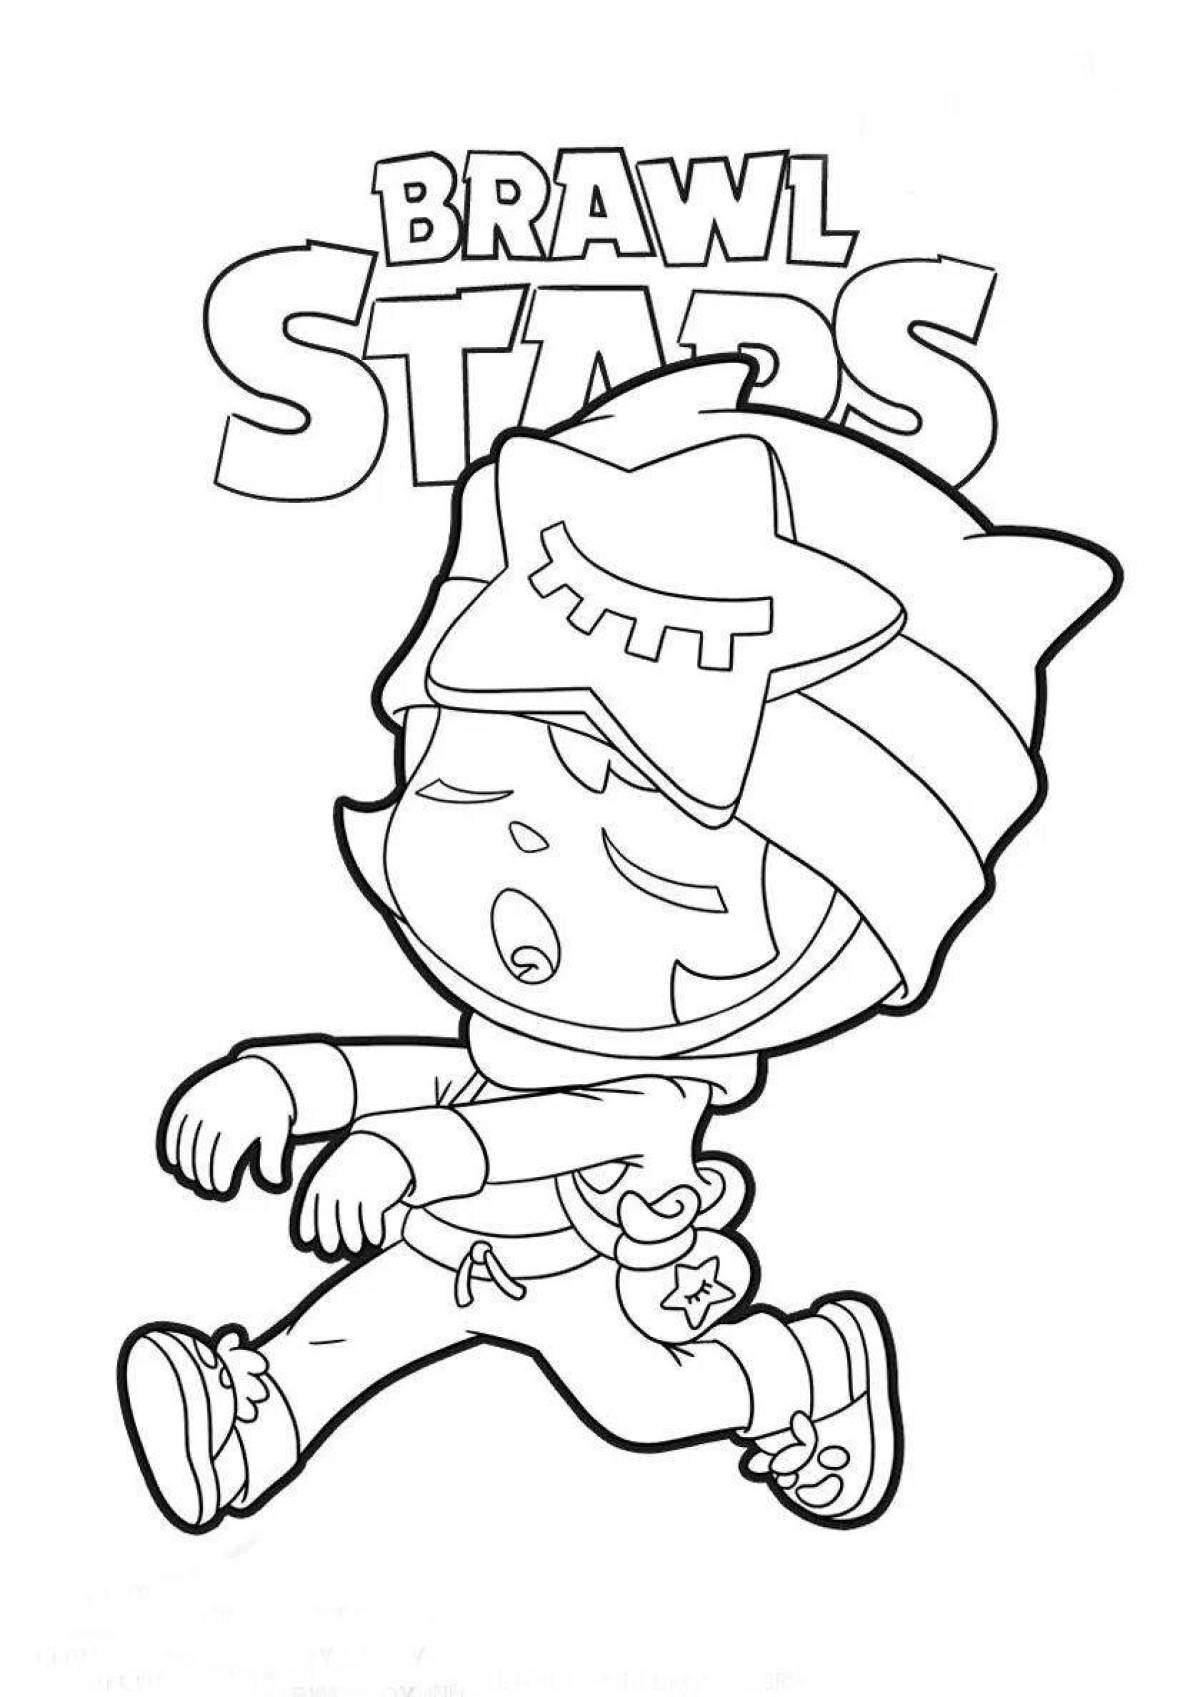 Collet bright coloring page